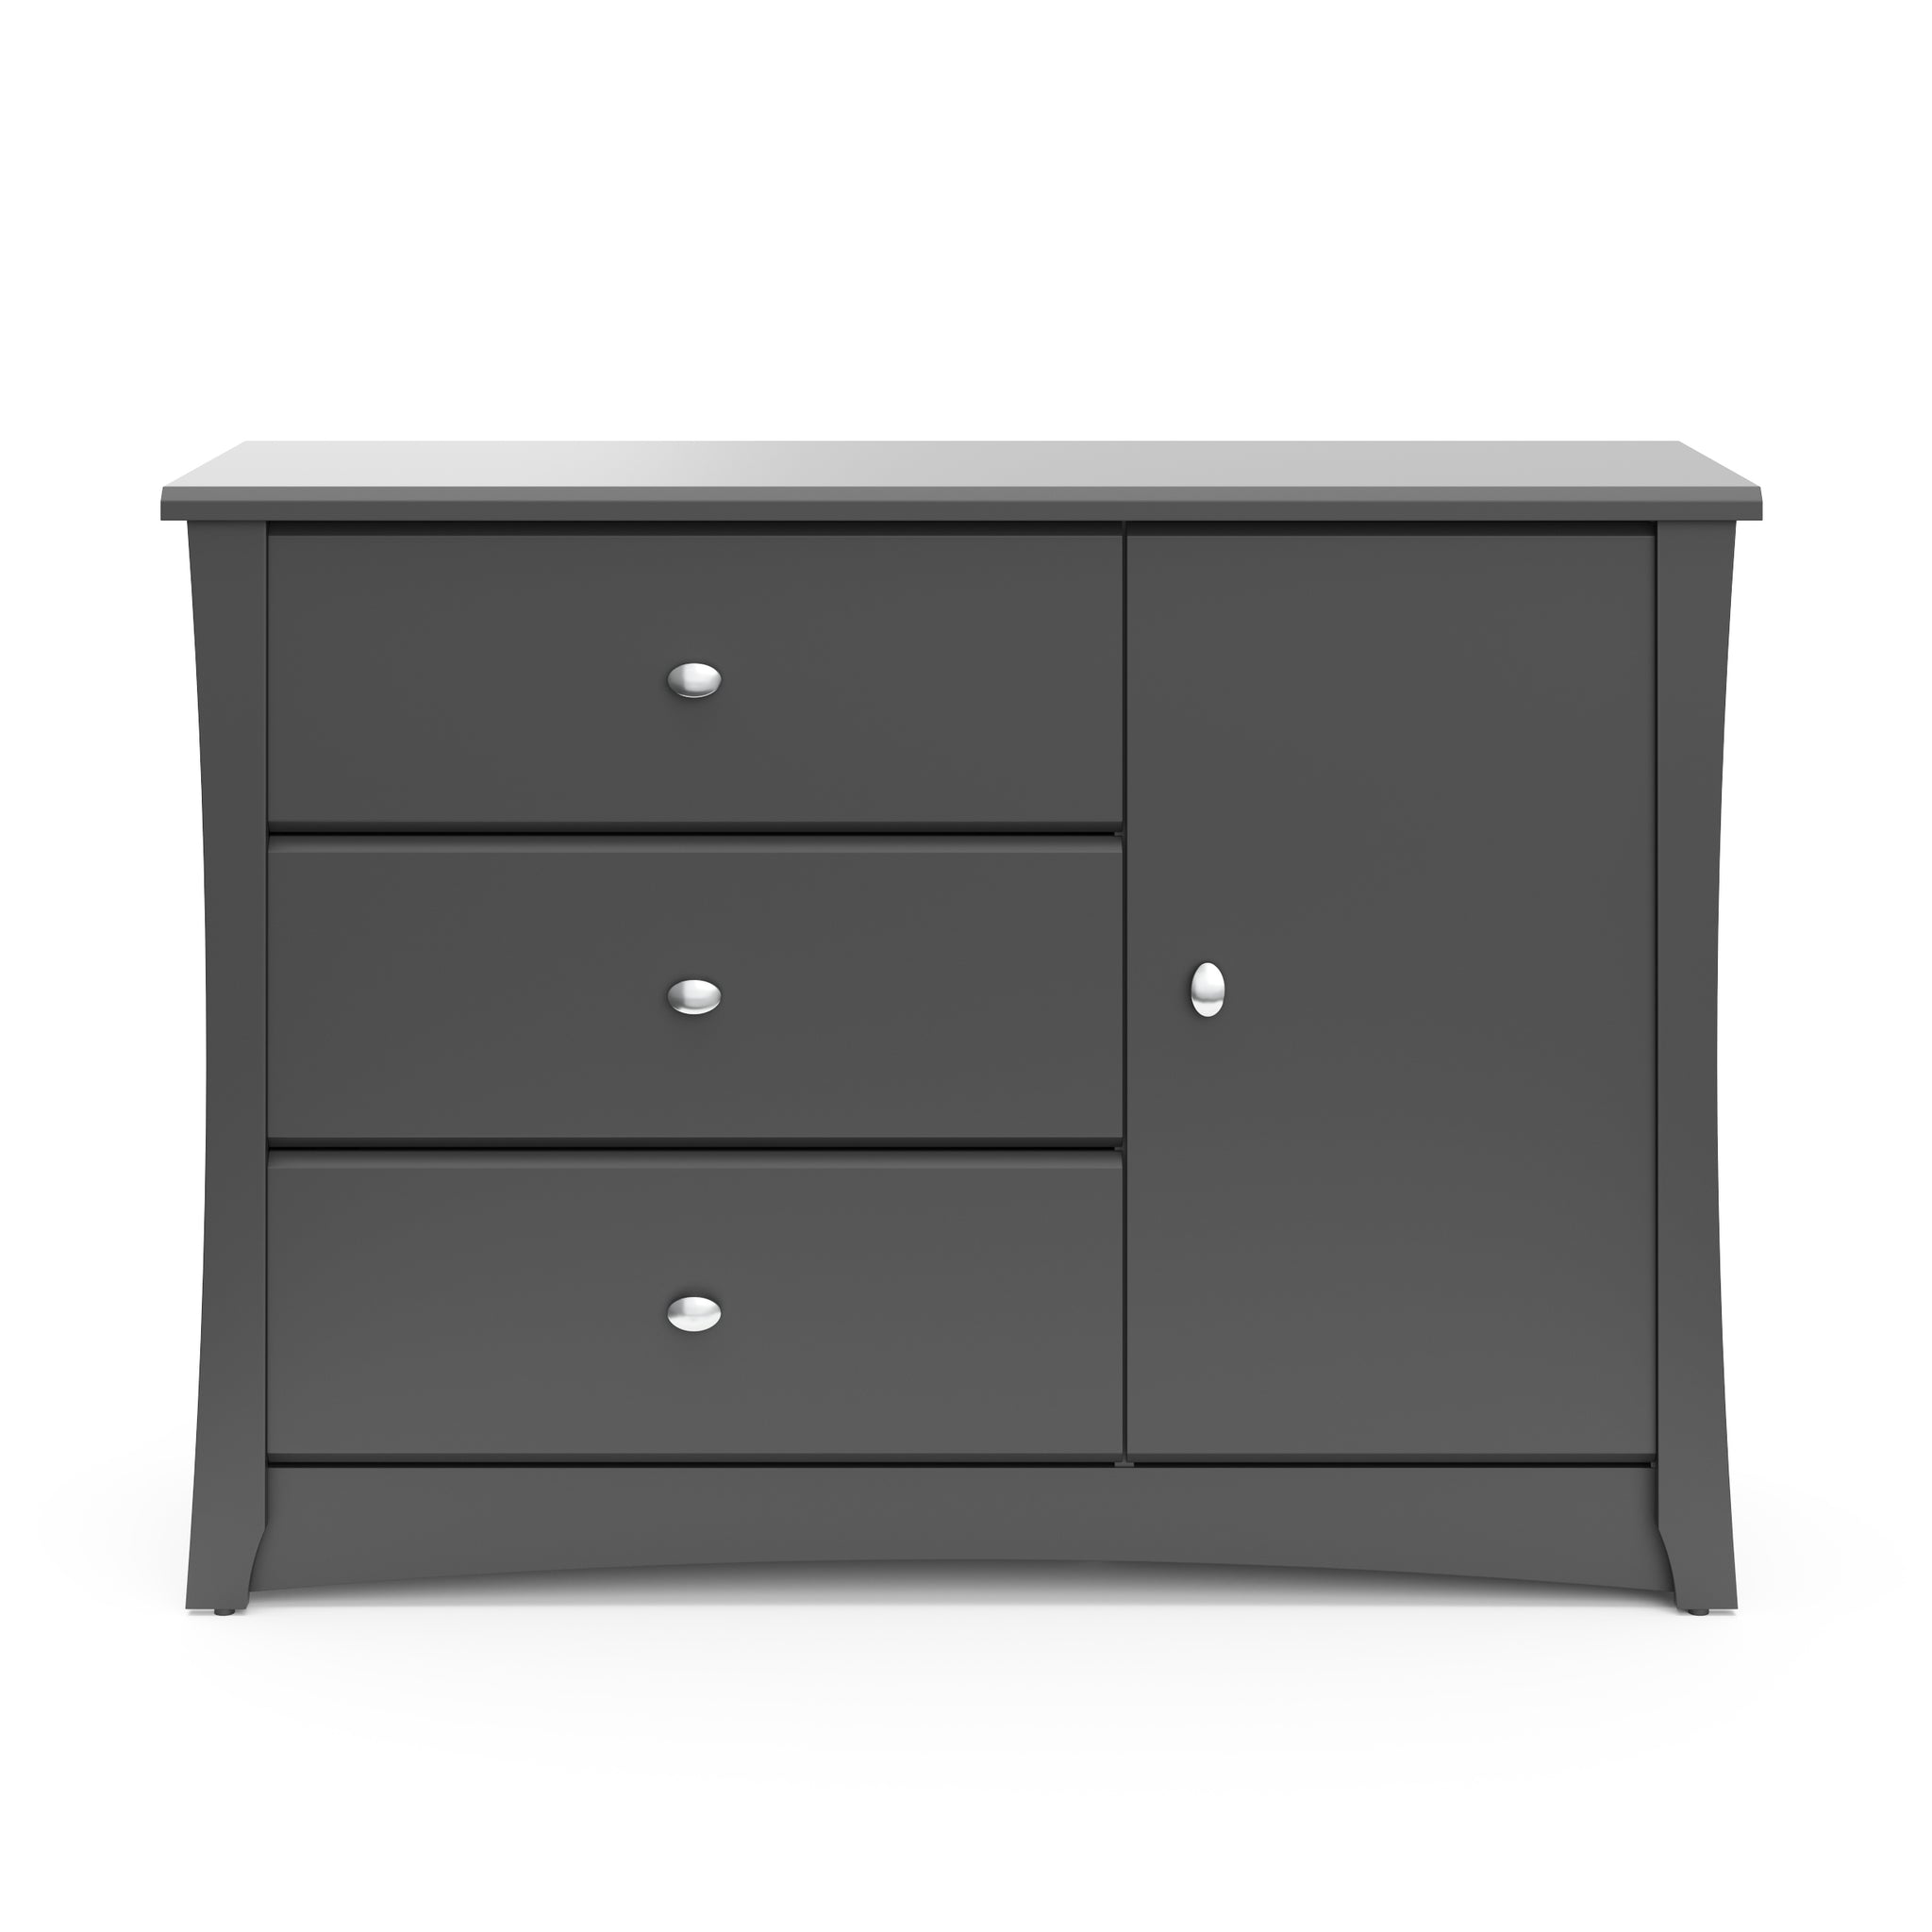 Front view of gray 3 drawer chest